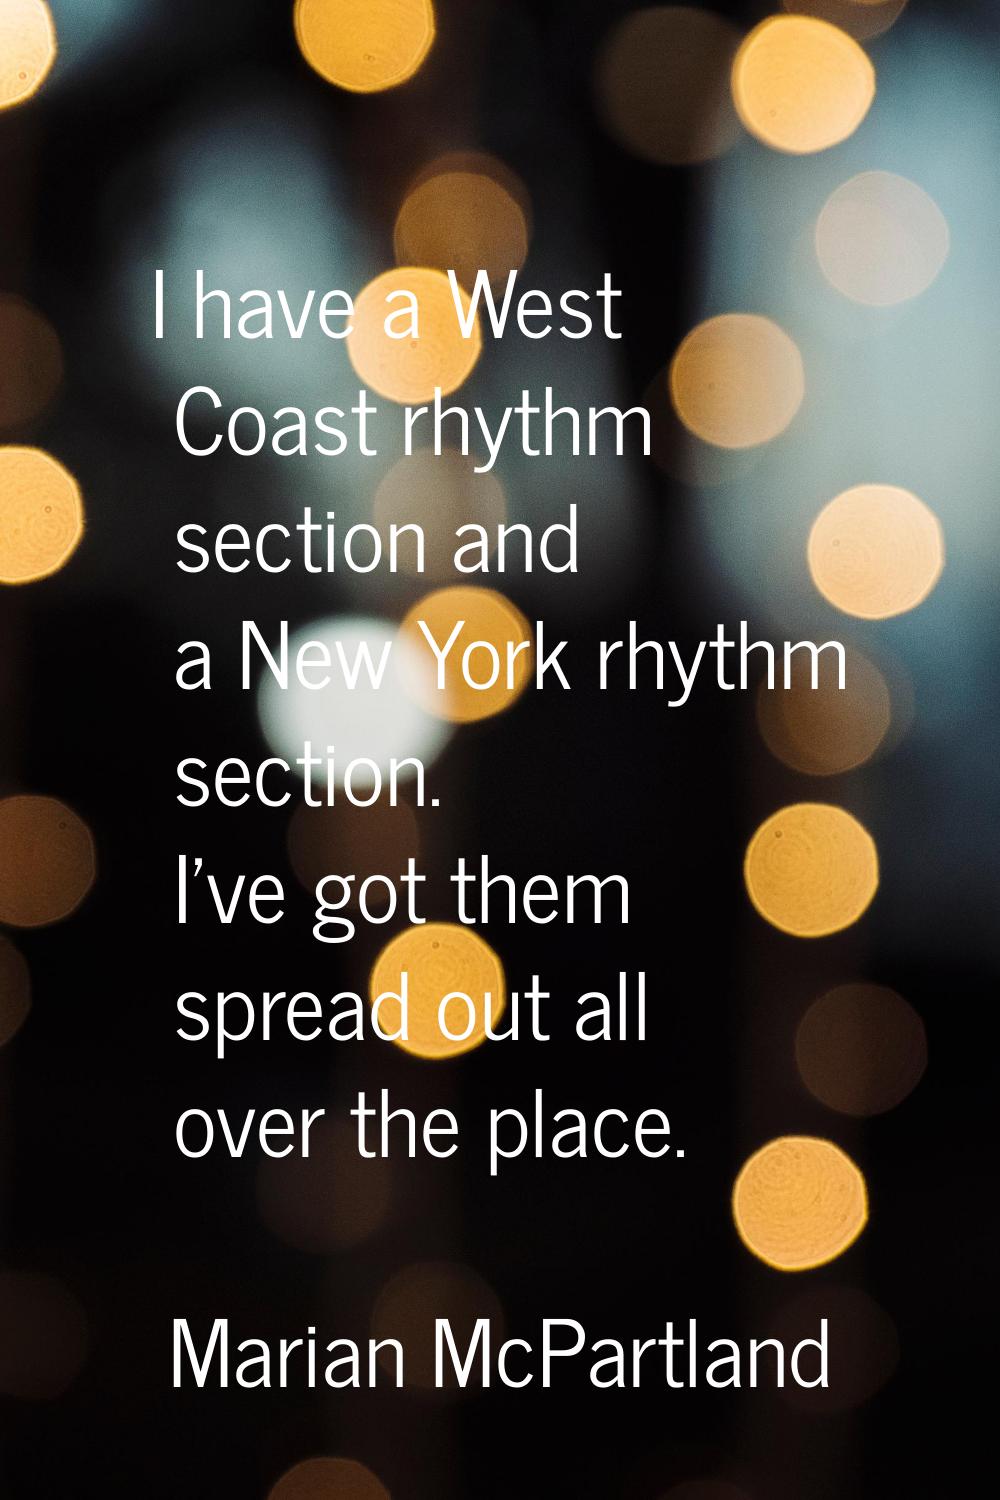 I have a West Coast rhythm section and a New York rhythm section. I've got them spread out all over